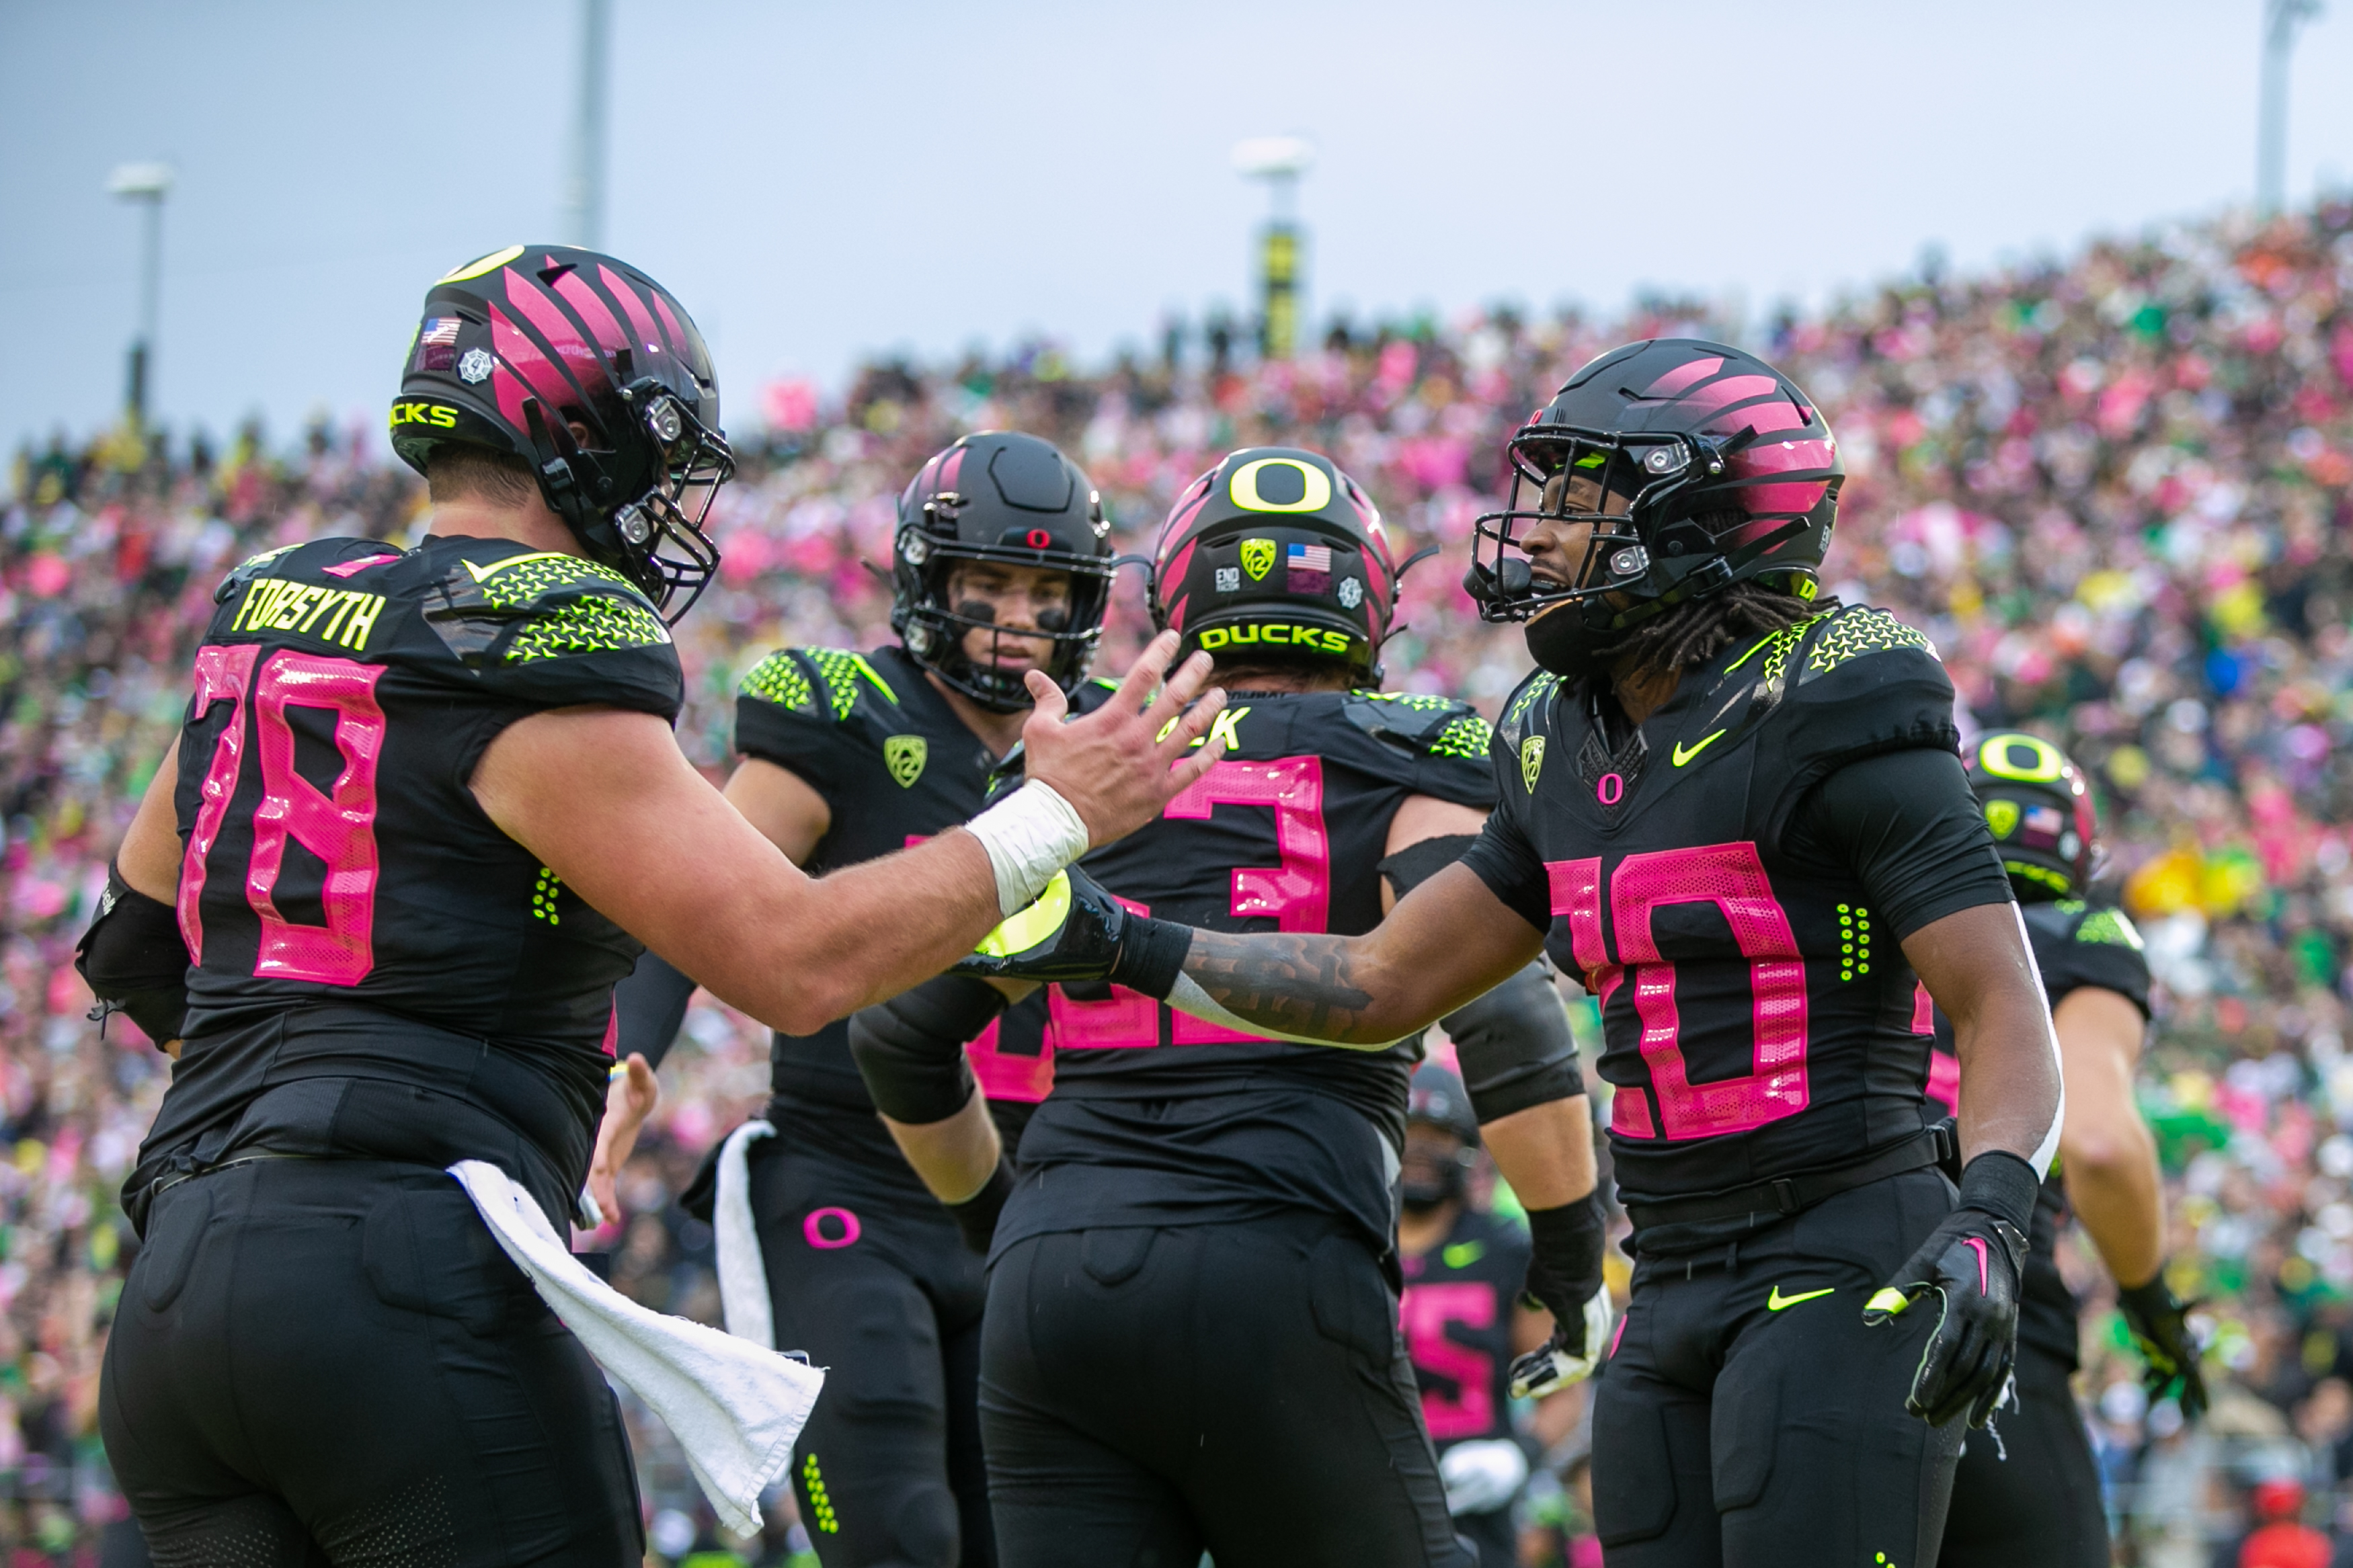 Oregon Unveils Neon Pink 'Stomp Out Cancer' Jerseys For UCLA Game